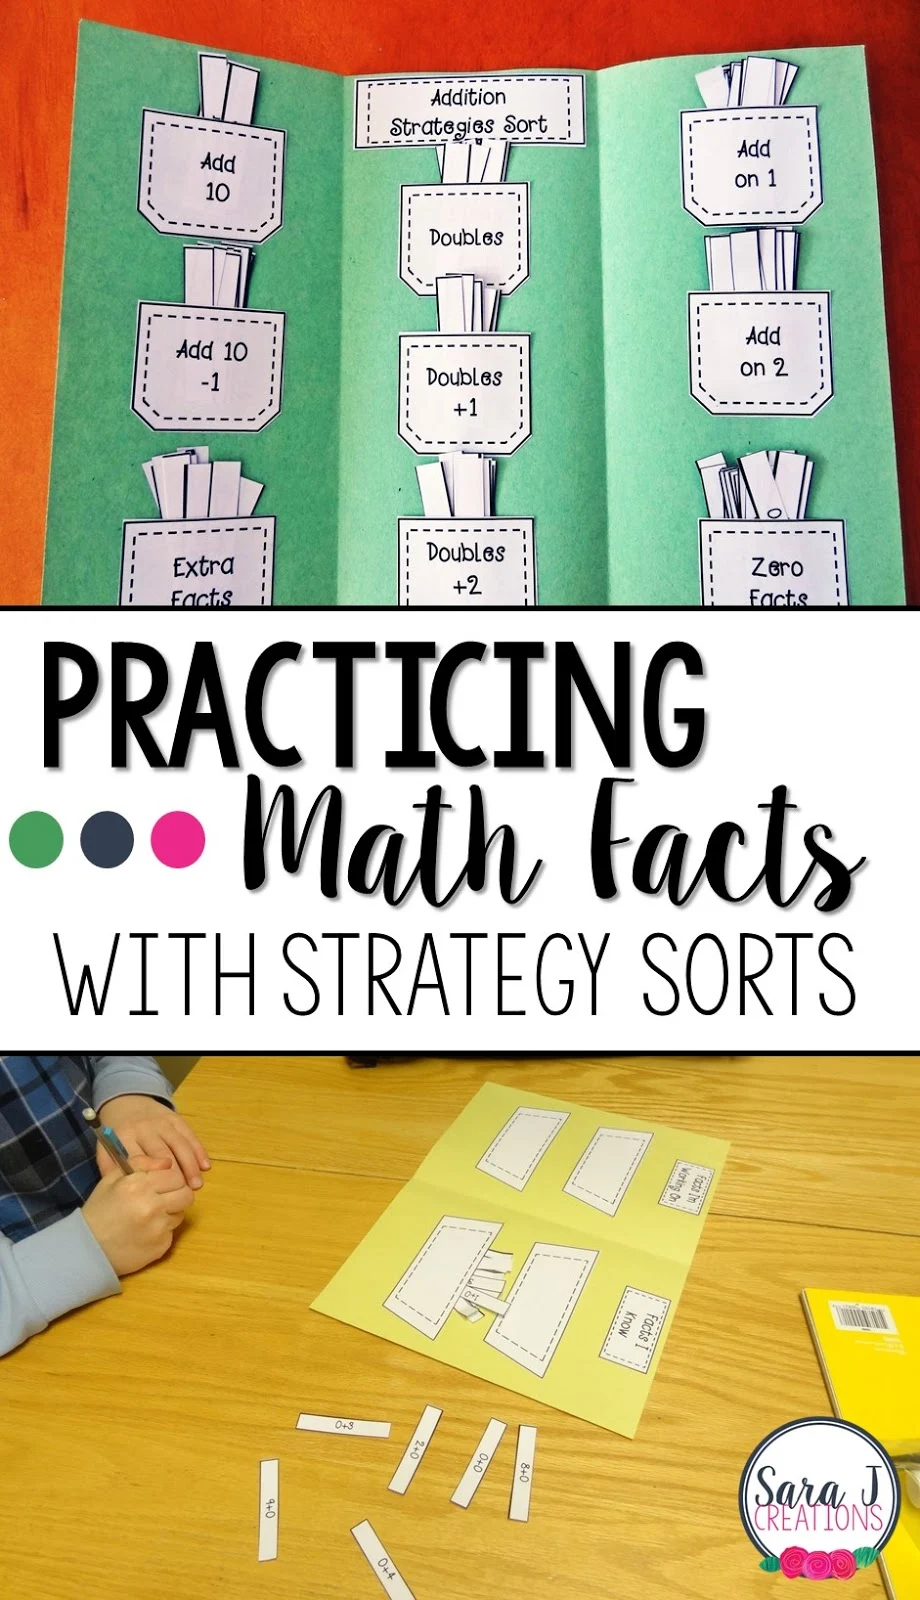 Games, printables and teaching ideas to make math fact practice and developing fluency more fun.  